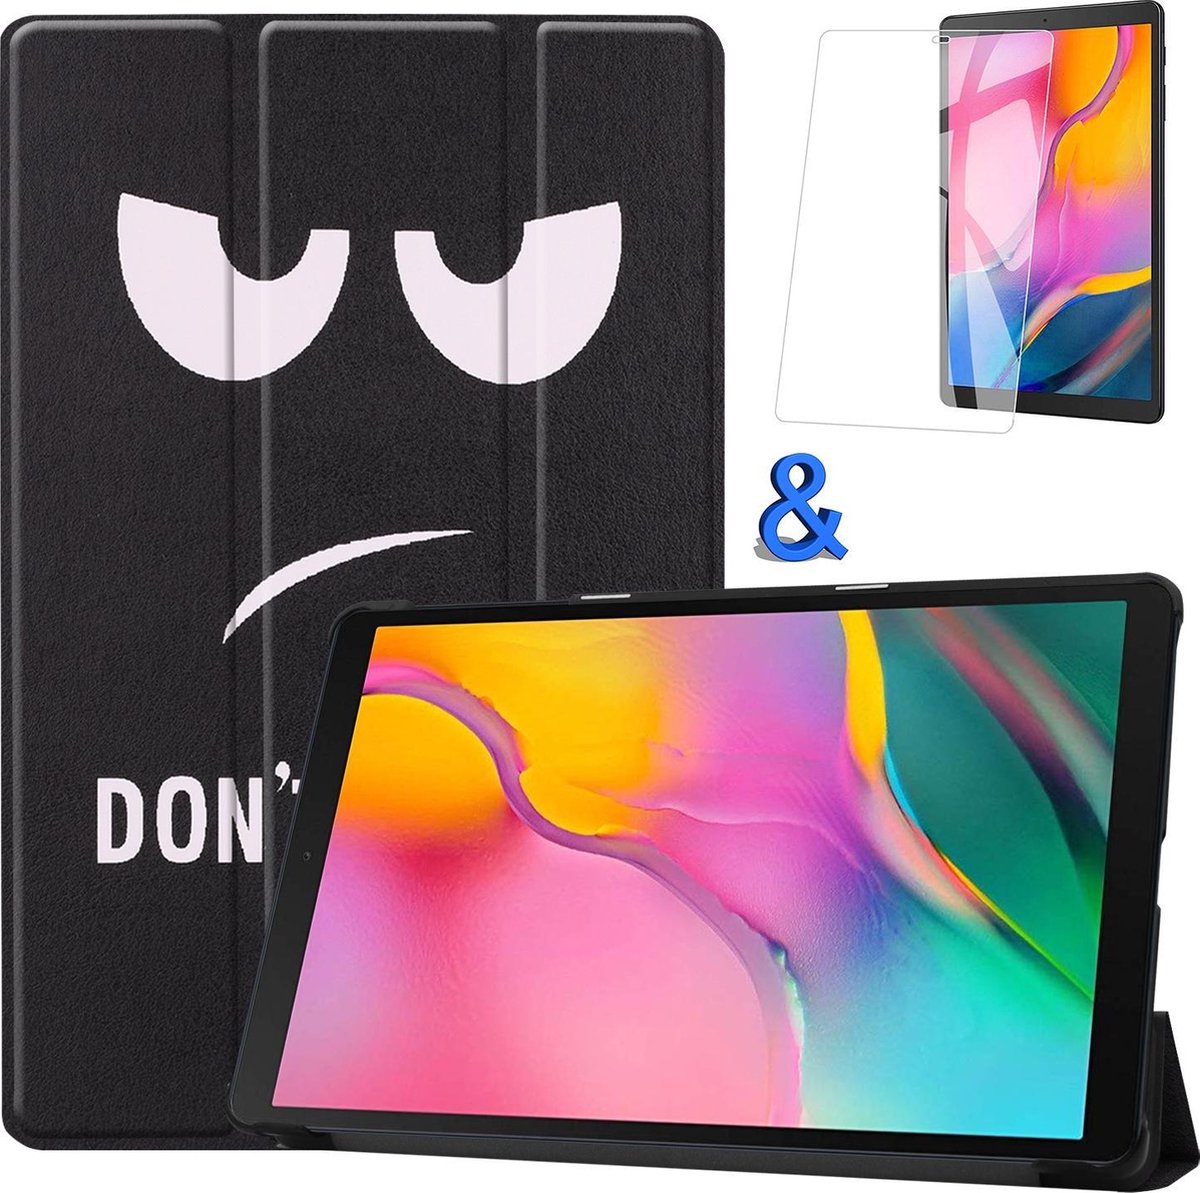 Samsung Galaxy Tab A 10.1 2019 Hoes met Screenprotector - Don't touch me